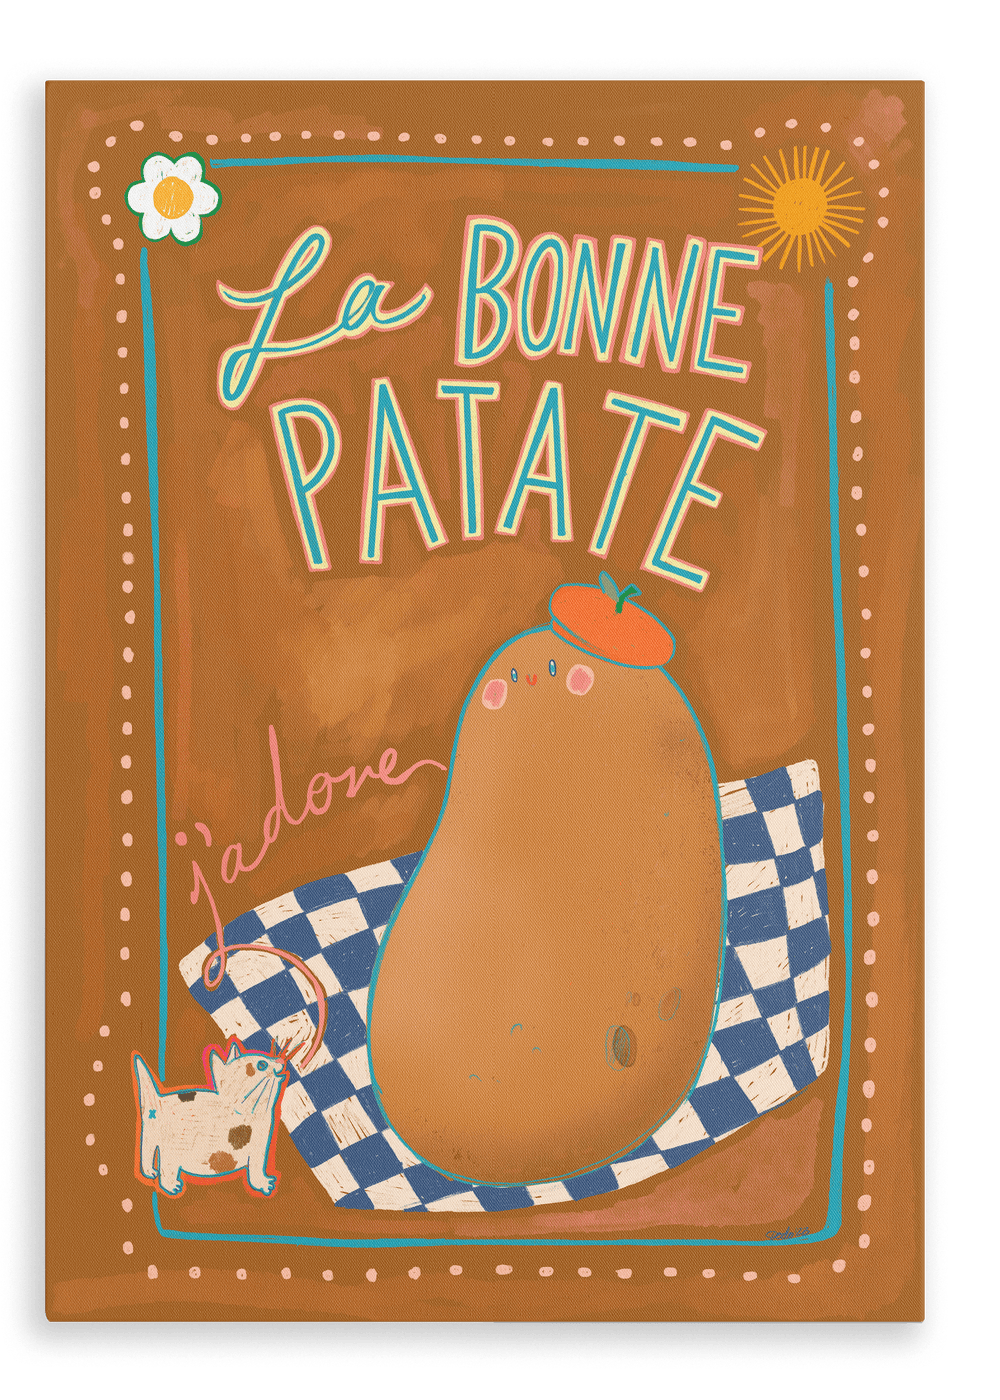 Illustration of a potato with a beret on a checkered cloth, next to a small dog, framed by the text "La Bonne Patate" and decorative elements like a sun and flower on an Aventures Des Créatures Canvas Print.